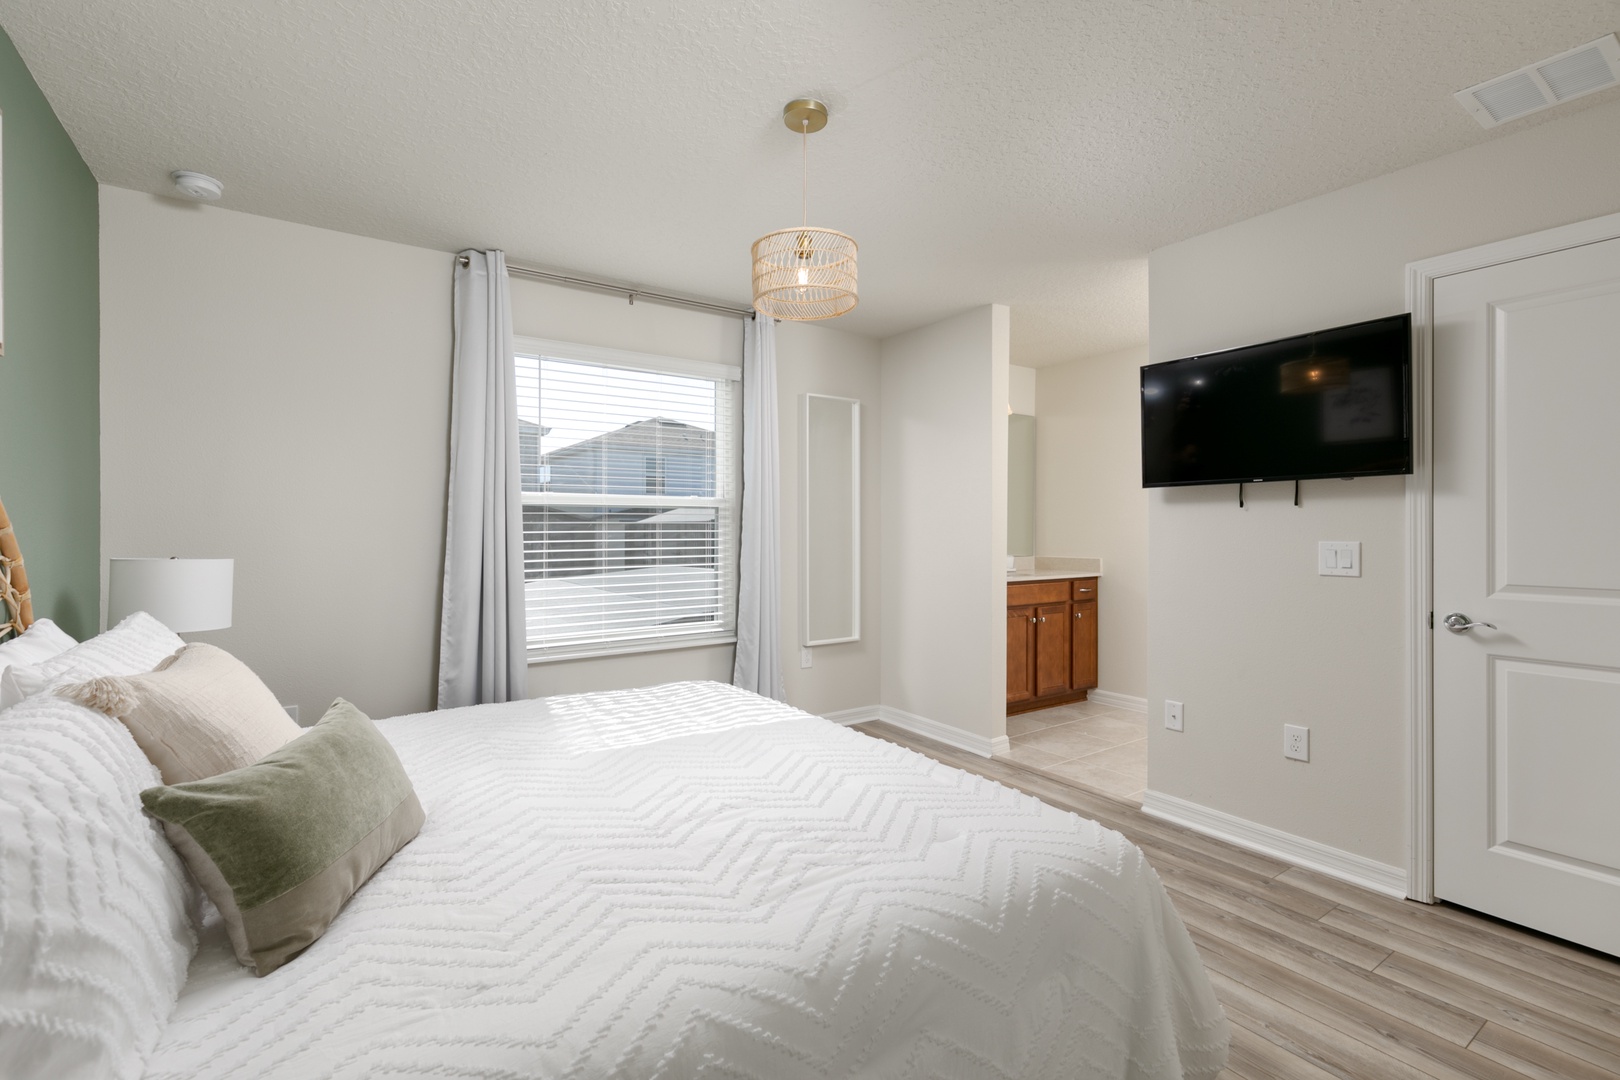 This 2nd floor king suite offers a Smart TV and access to a Jack & Jill bathroom